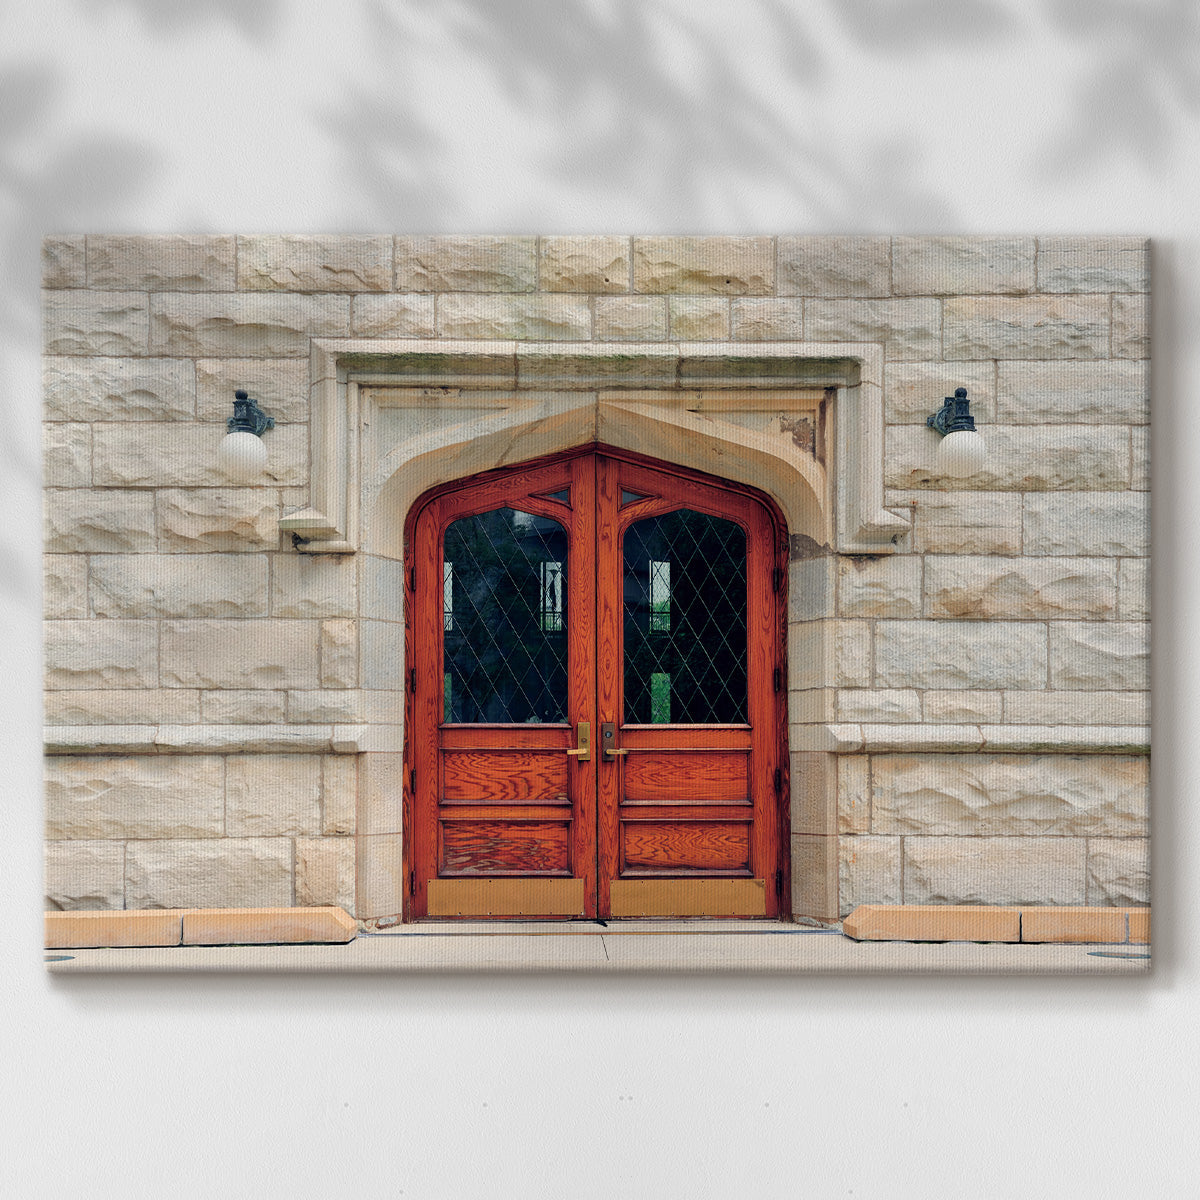 Chicago Watertower Doors - Gallery Wrapped Canvas